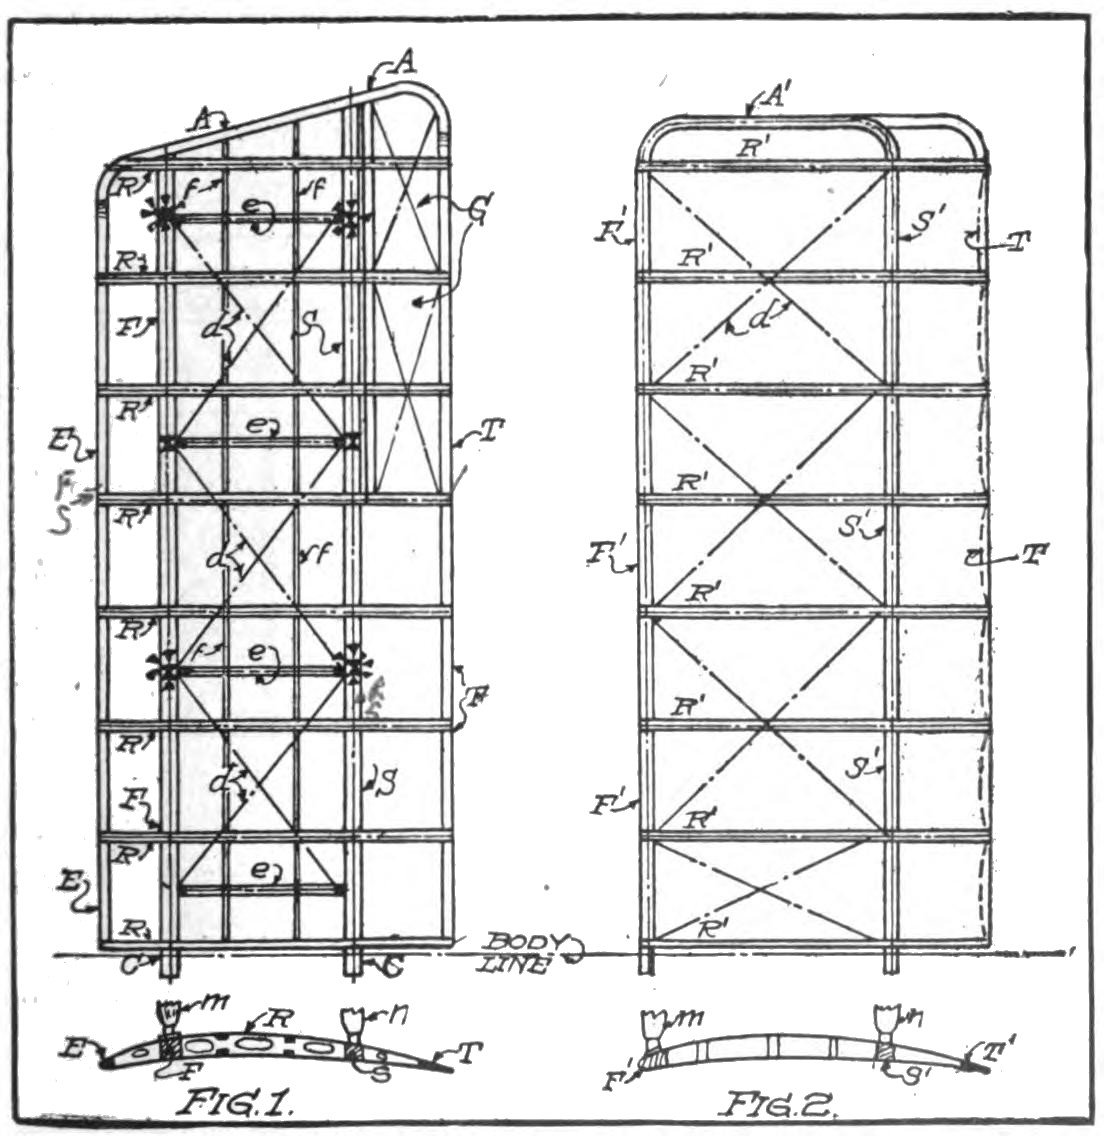 Fig. 1. (Left) Wing Assembly with Spar to the Rear of the Entering Edge. Fig. 2. (Right) Assembly with the Front Spar at the Entering Edge.